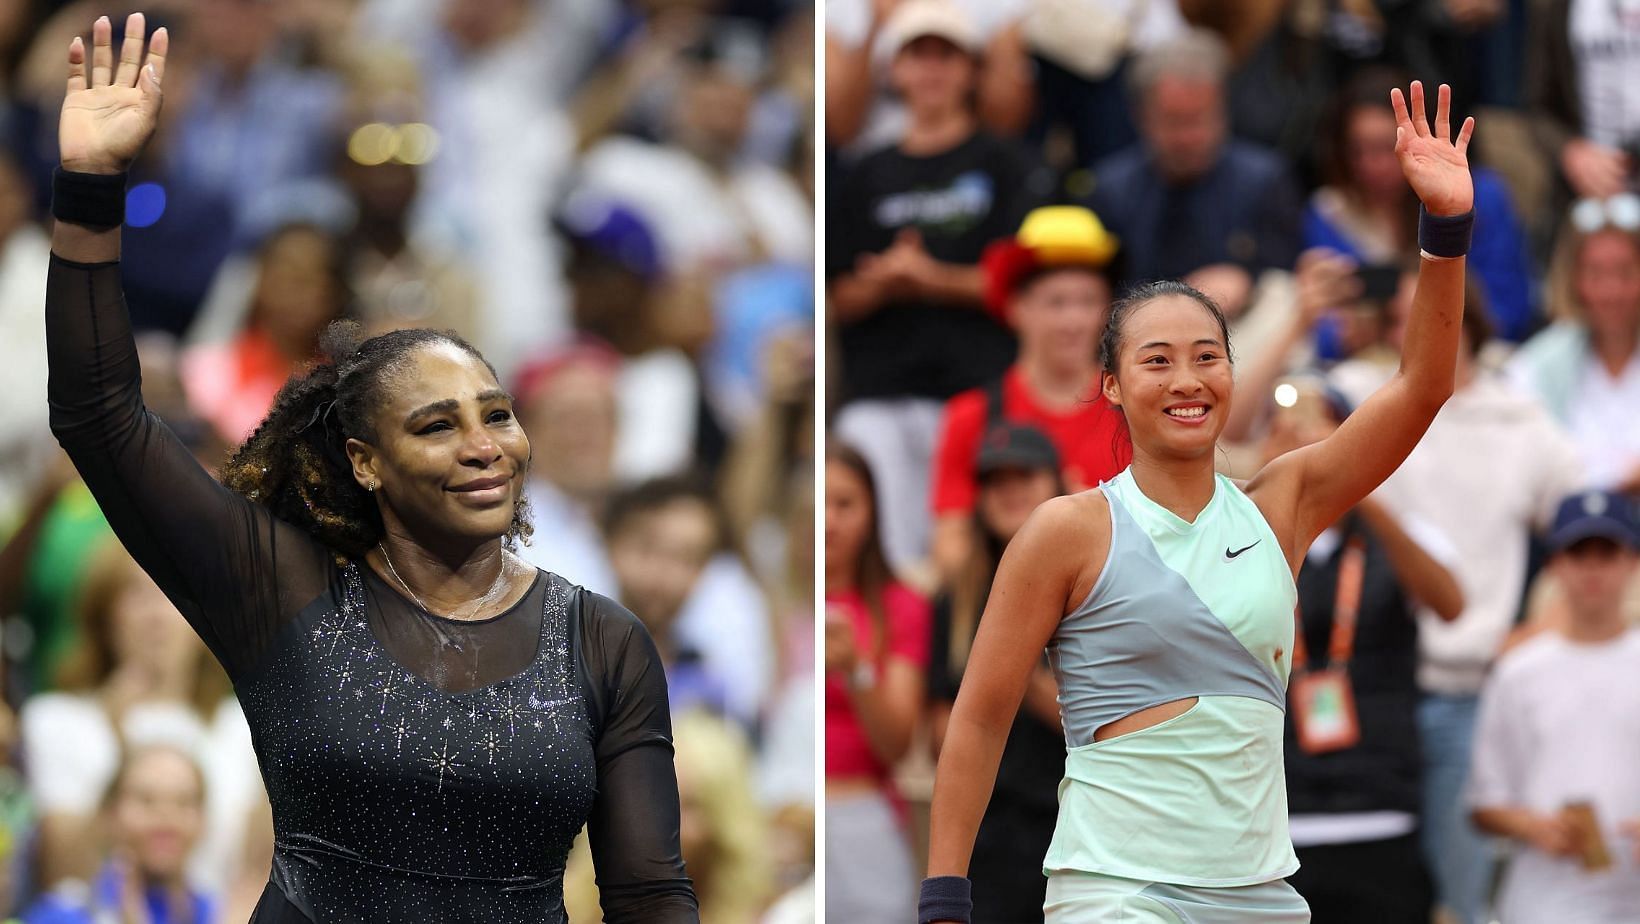 Qinwen Zheng has revealed the reasons why she idolized Serena Williams as a child